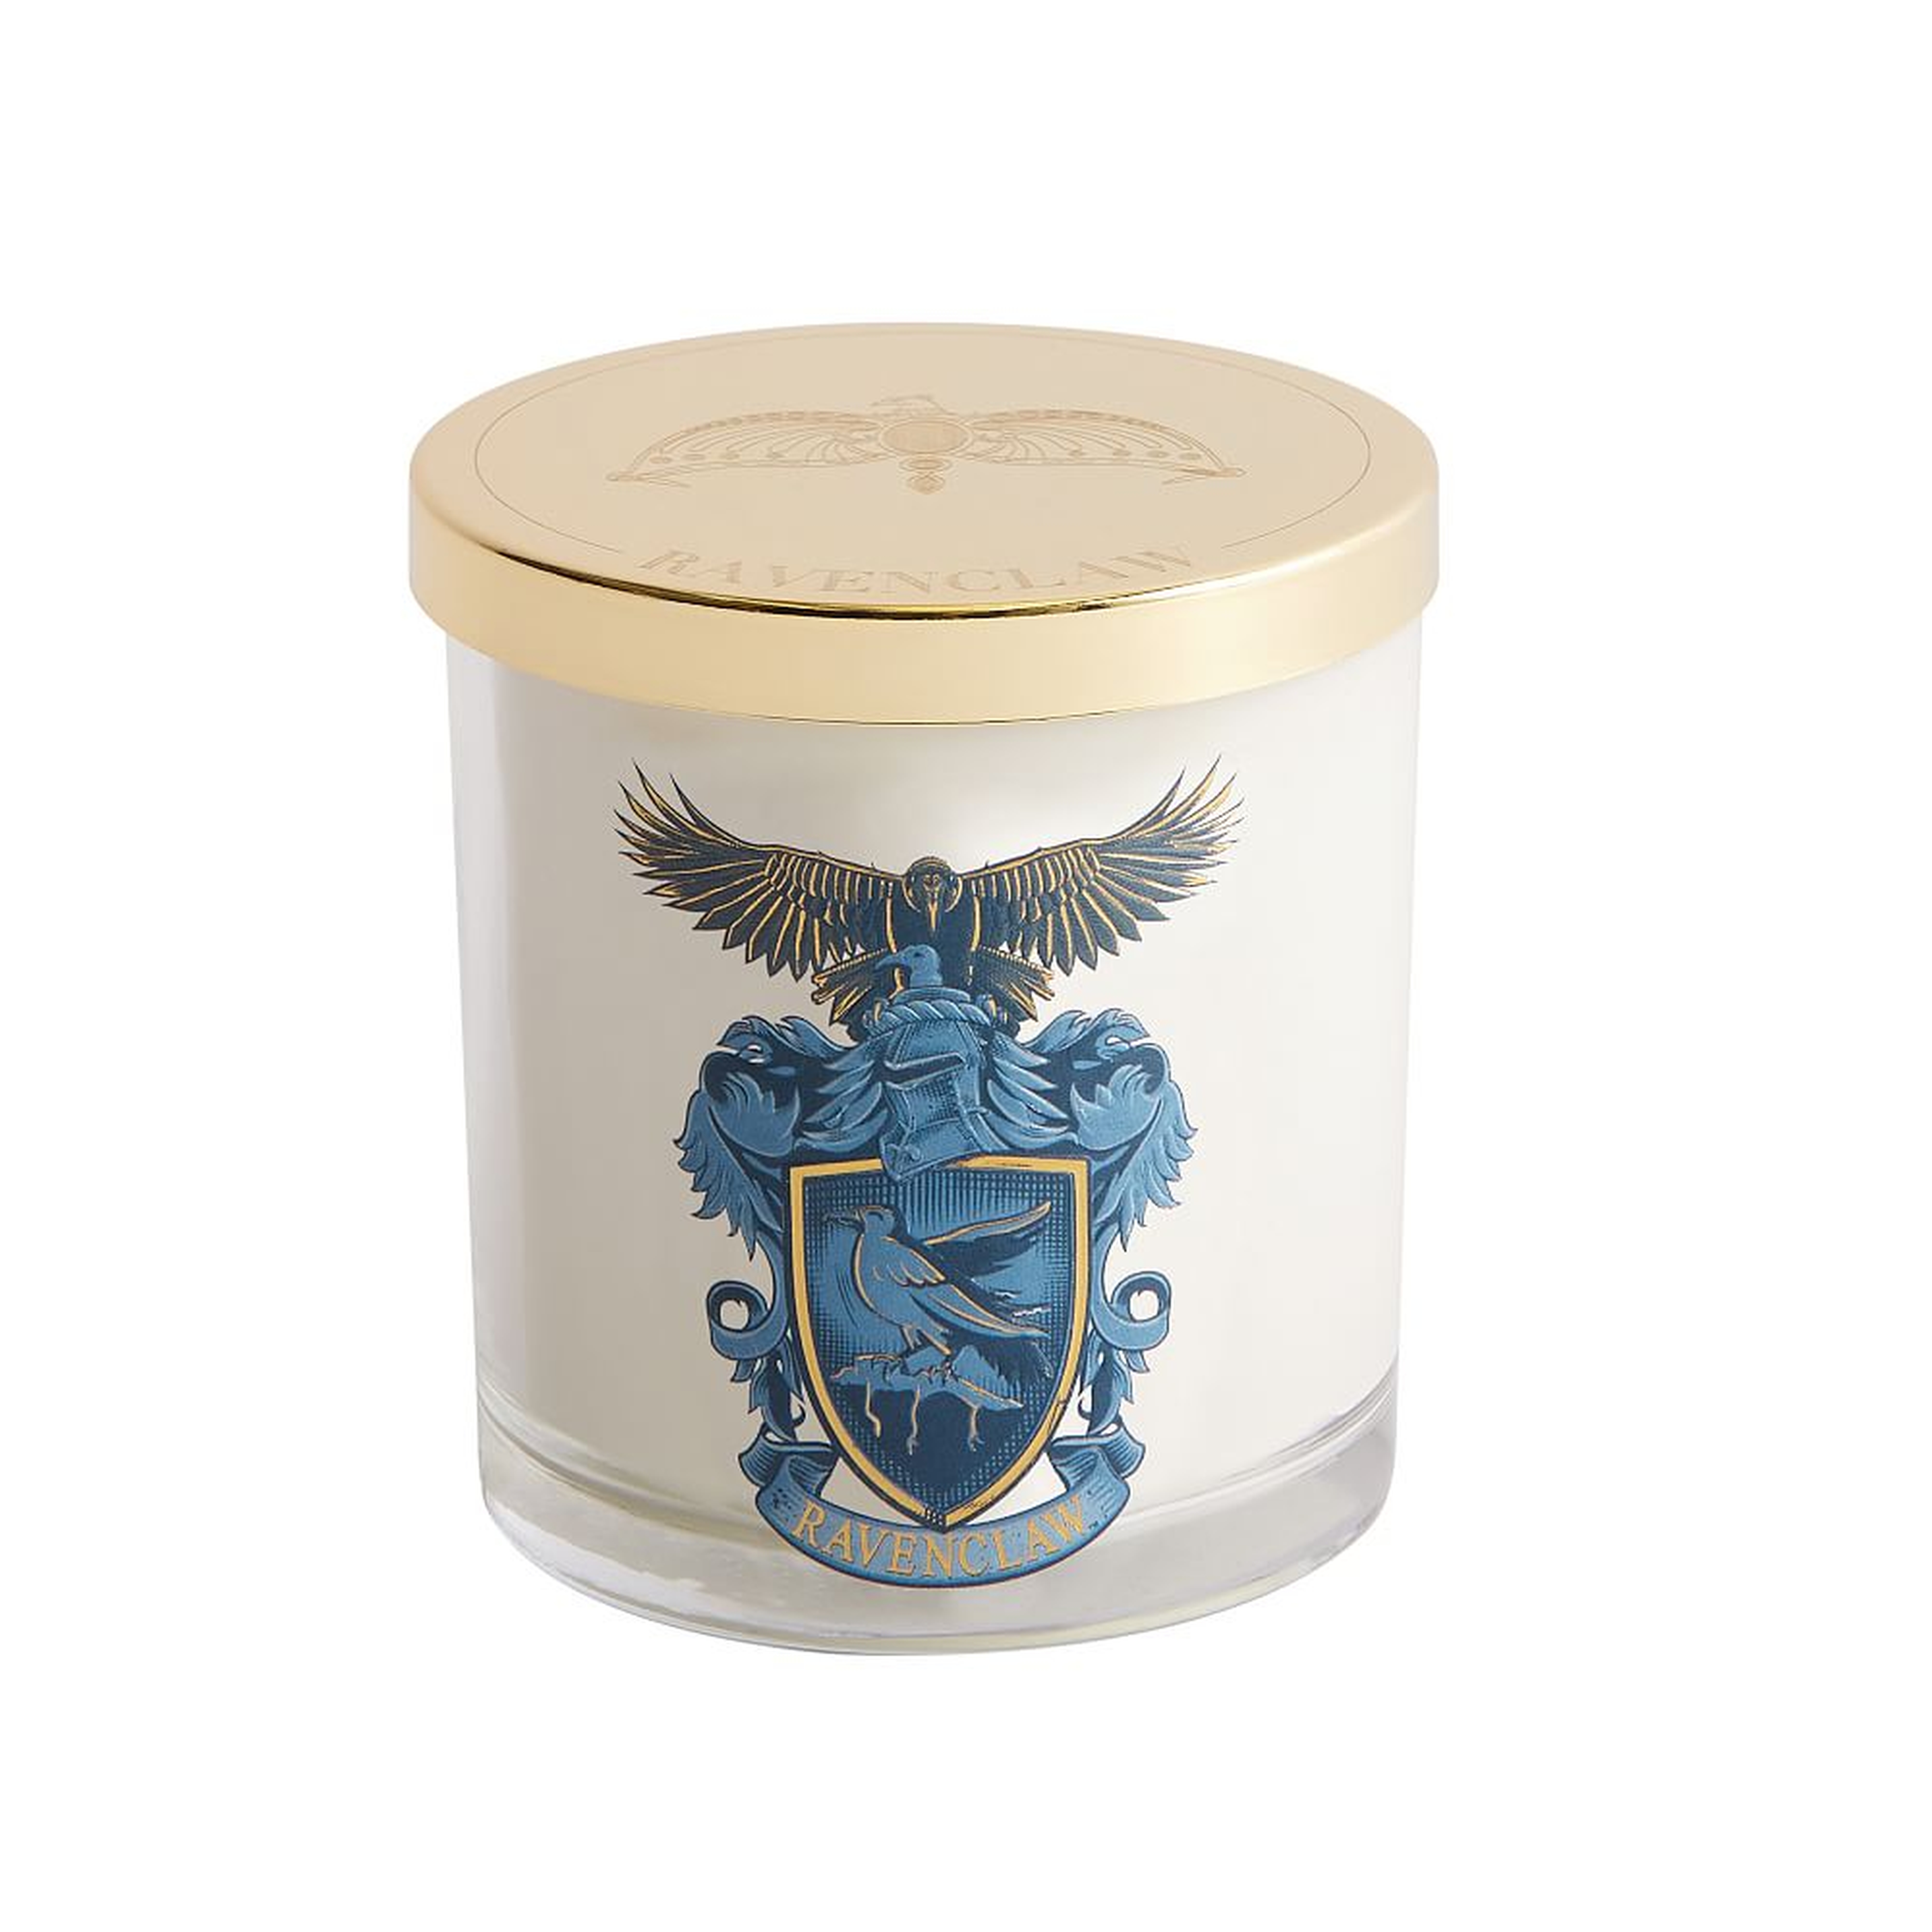 HARRY POTTER(TM) Scented Candle, Ravenclaw - Pottery Barn Teen